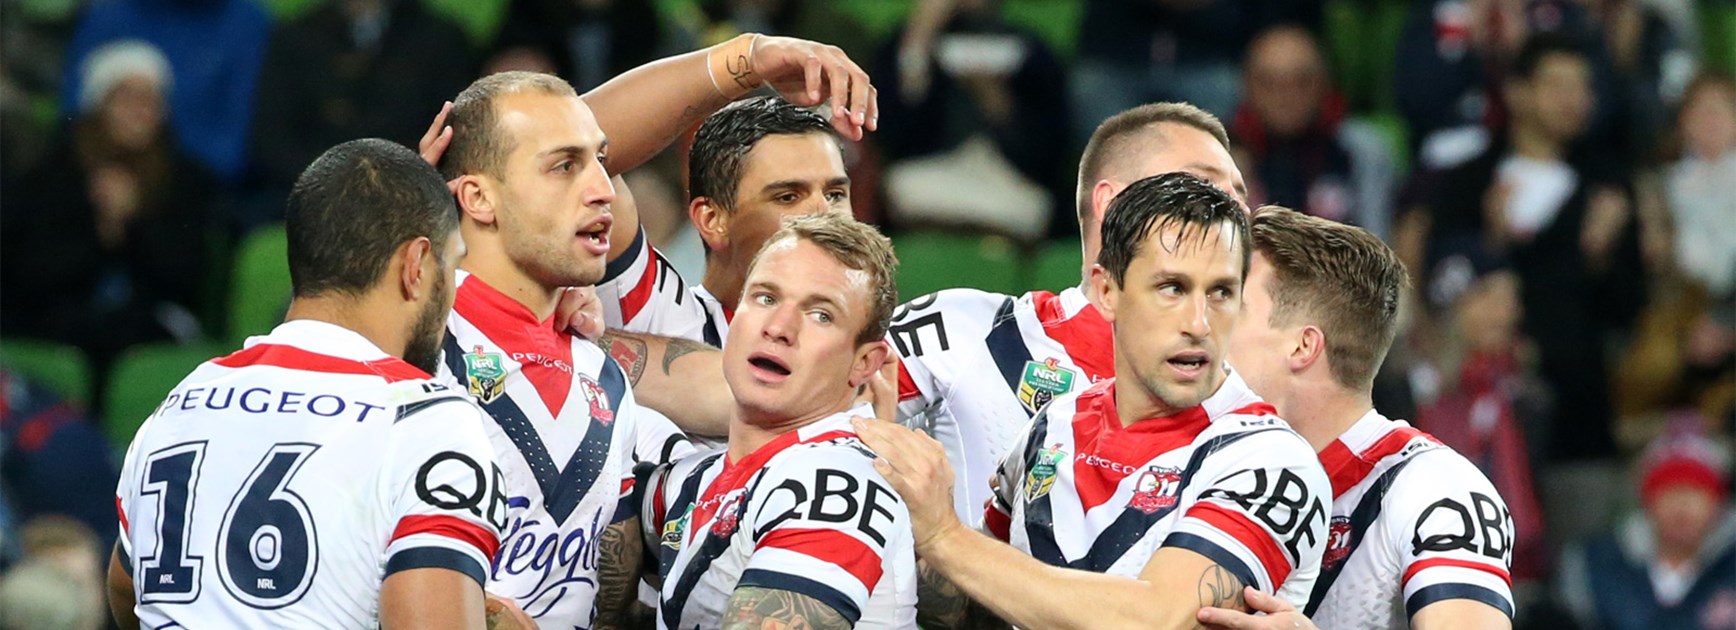 The Sydney Roosters celebrate a try against Melbourne in Round 20.